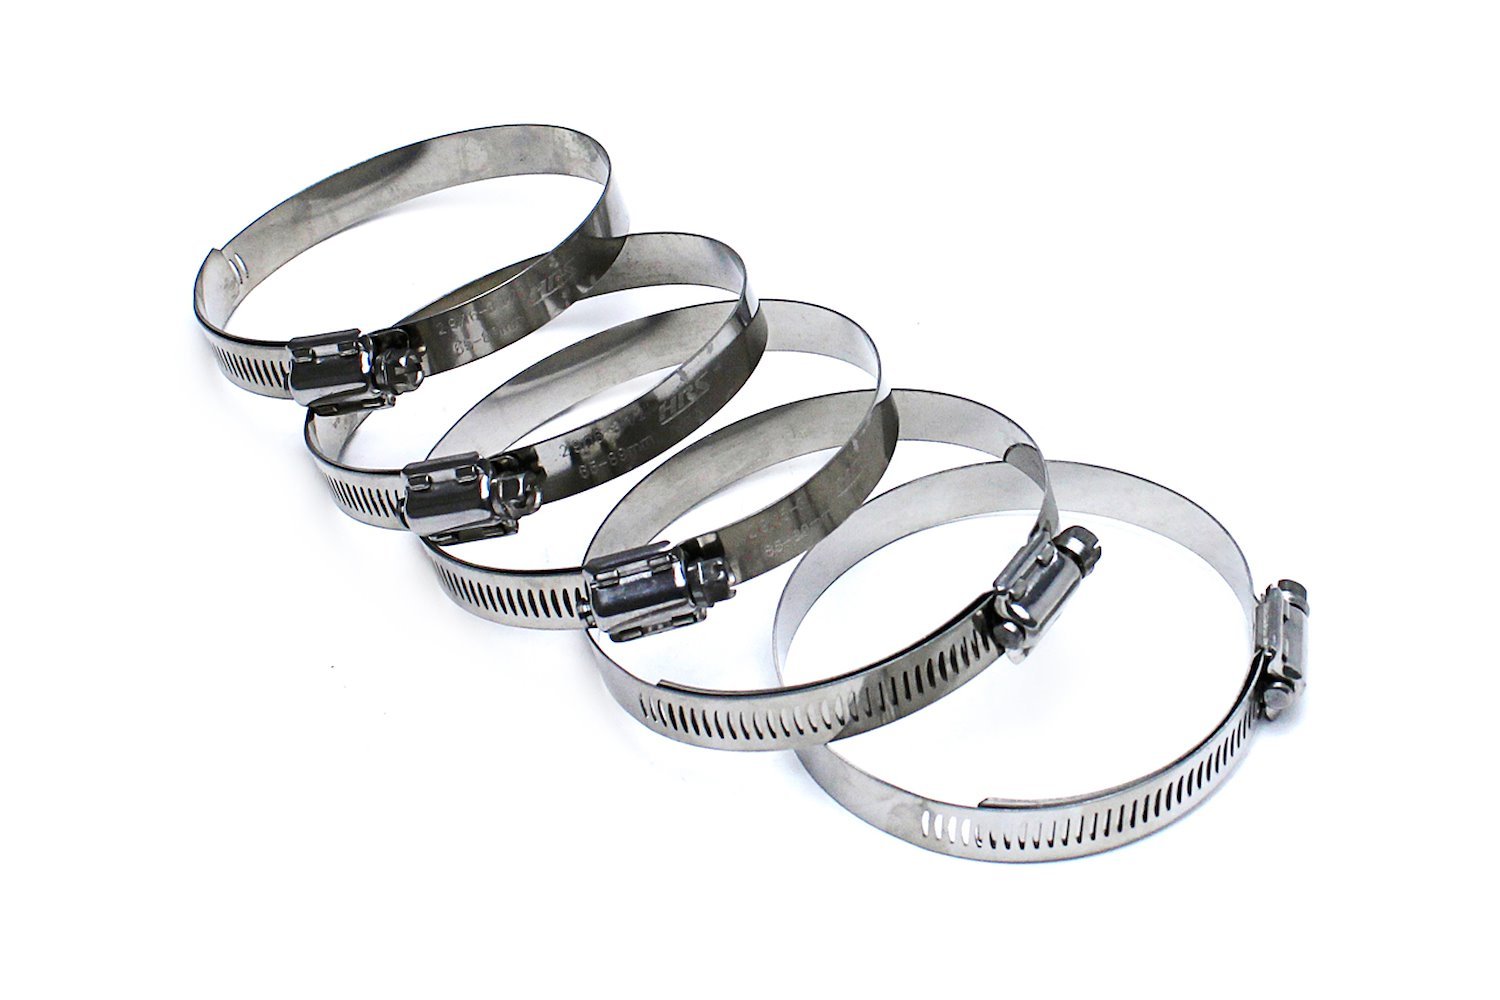 SSWC-130-152x5 Stainless Steel Worm Gear Hose Clamp, Effective Range: 5-5/8 in.- 6-1/2 in., 5Pc